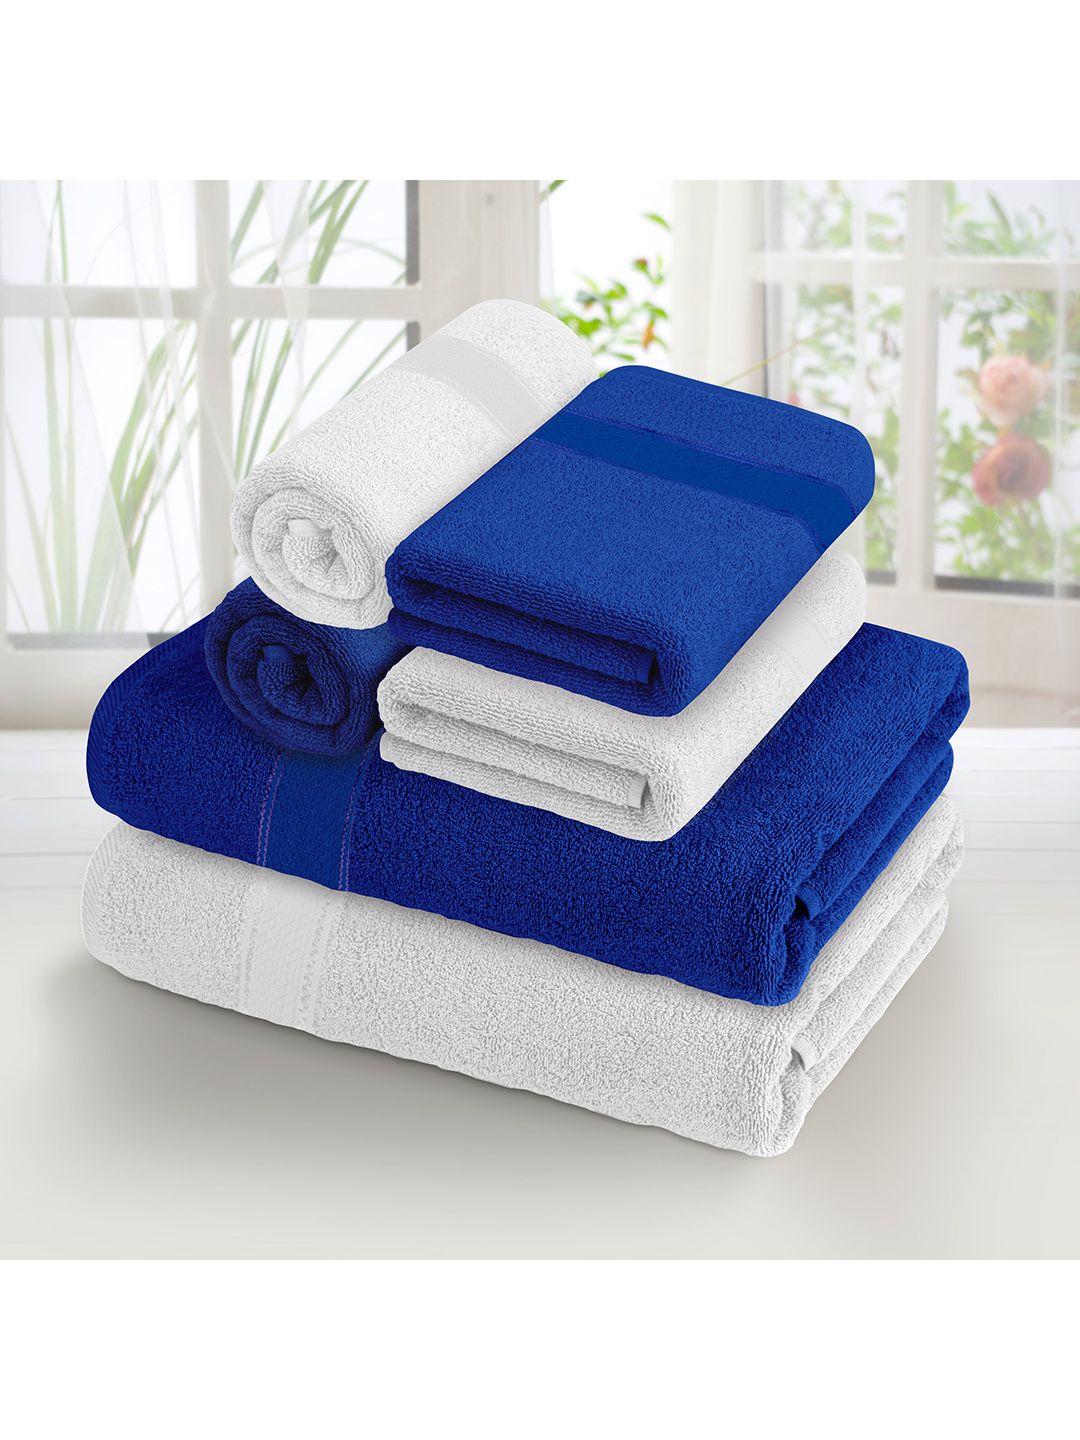 Athome by Nilkamal Set of 6 Cotton 370 GSM Towel Set Price in India